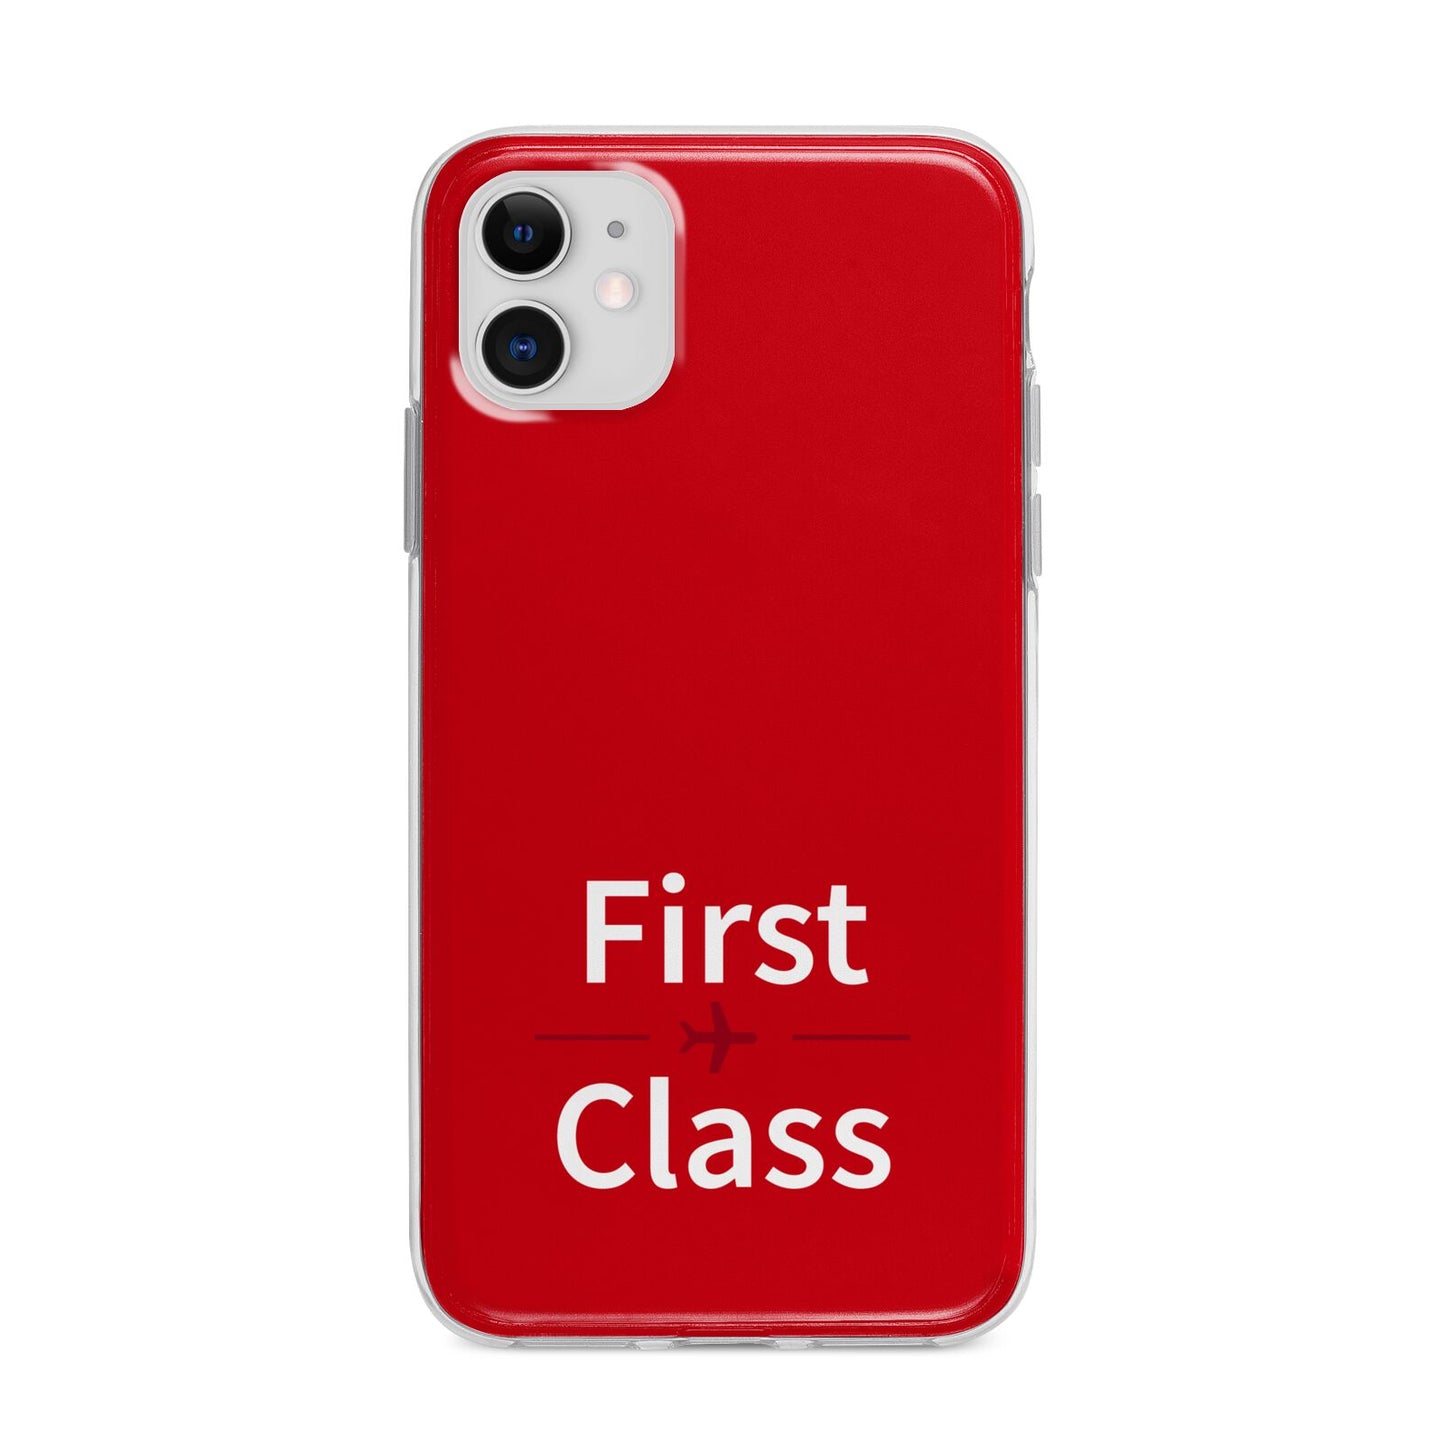 First Class Apple iPhone 11 in White with Bumper Case